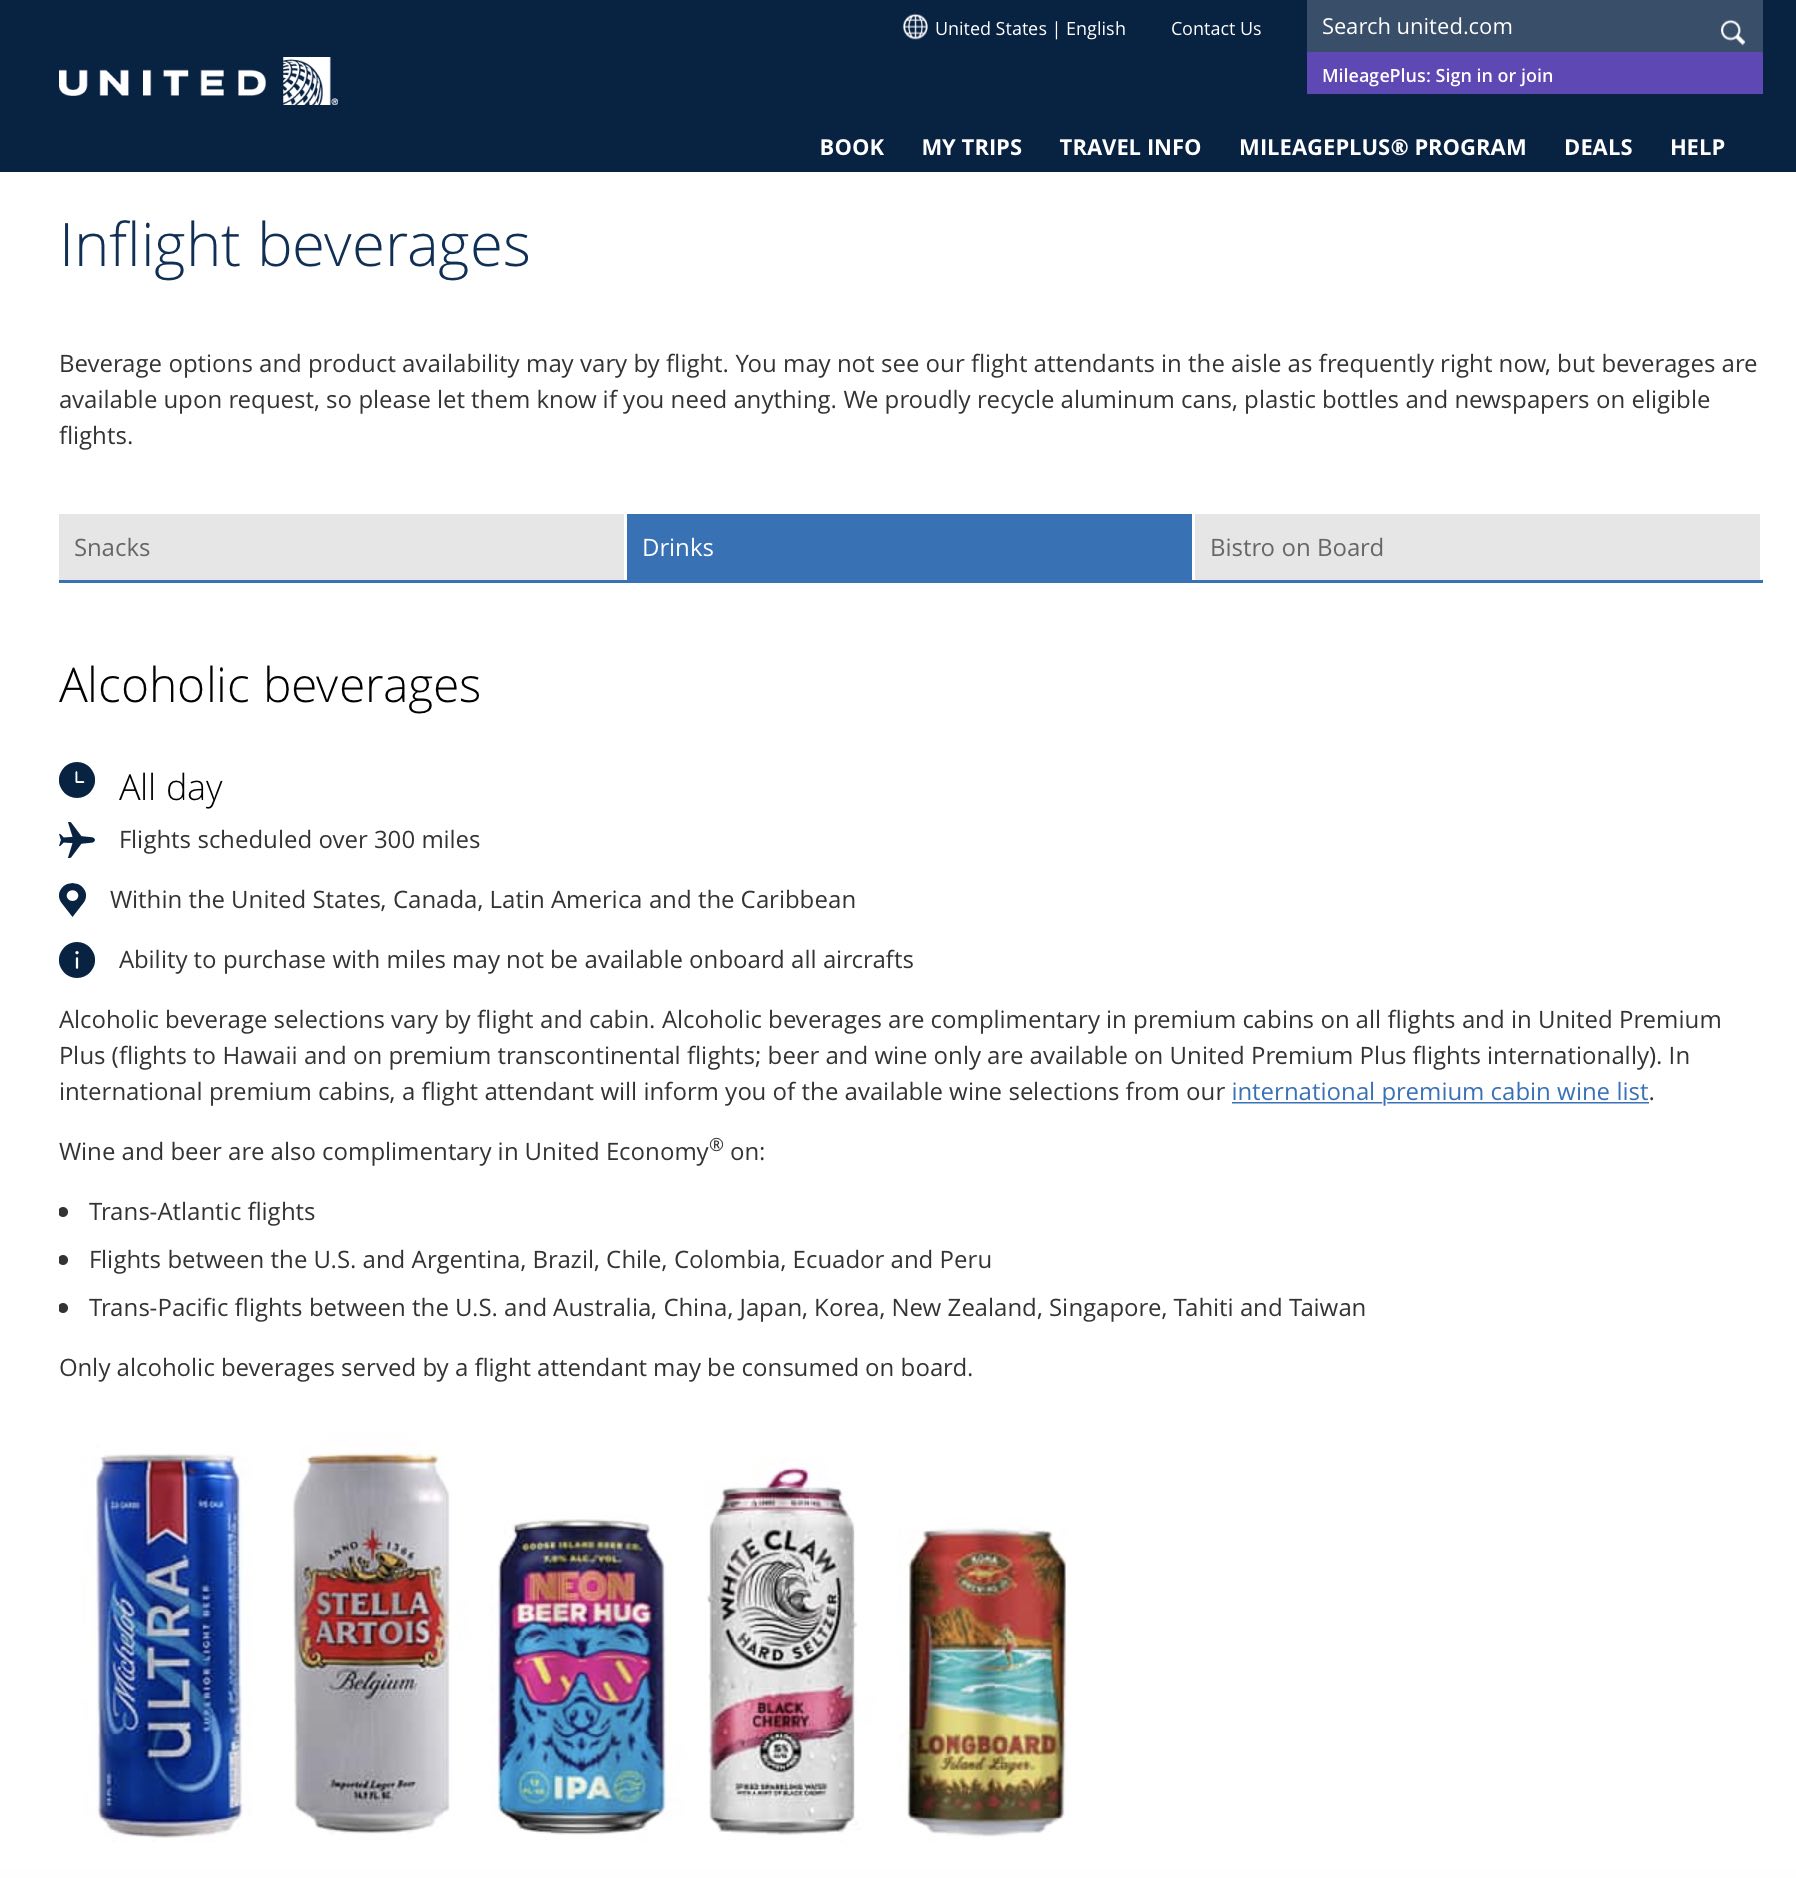 Premium Economy Cutbacks At United Airlines Demonstrate Tension Between Push For Quality And Cost Controls &#8211; Live and Let&#039;s Fly United Airilnes Premium Plus Cutbacks